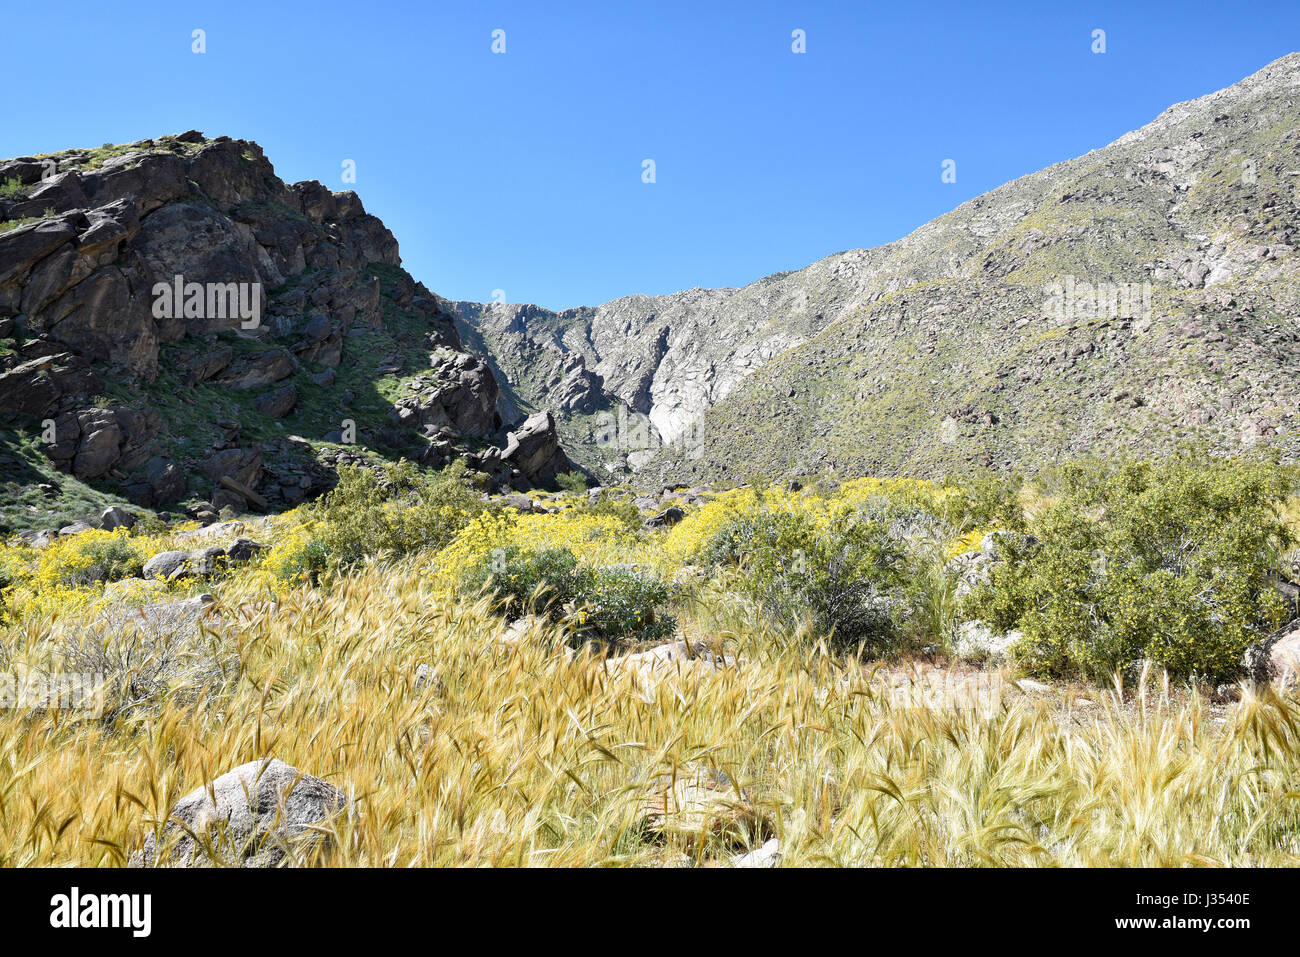 PALM SPRINGS, CA - MARCH 24, 2017: Tahquitz Canyon. The canyon is one of the most beautiful and culturally sensitive areas of the Agua Caliente Indian Stock Photo